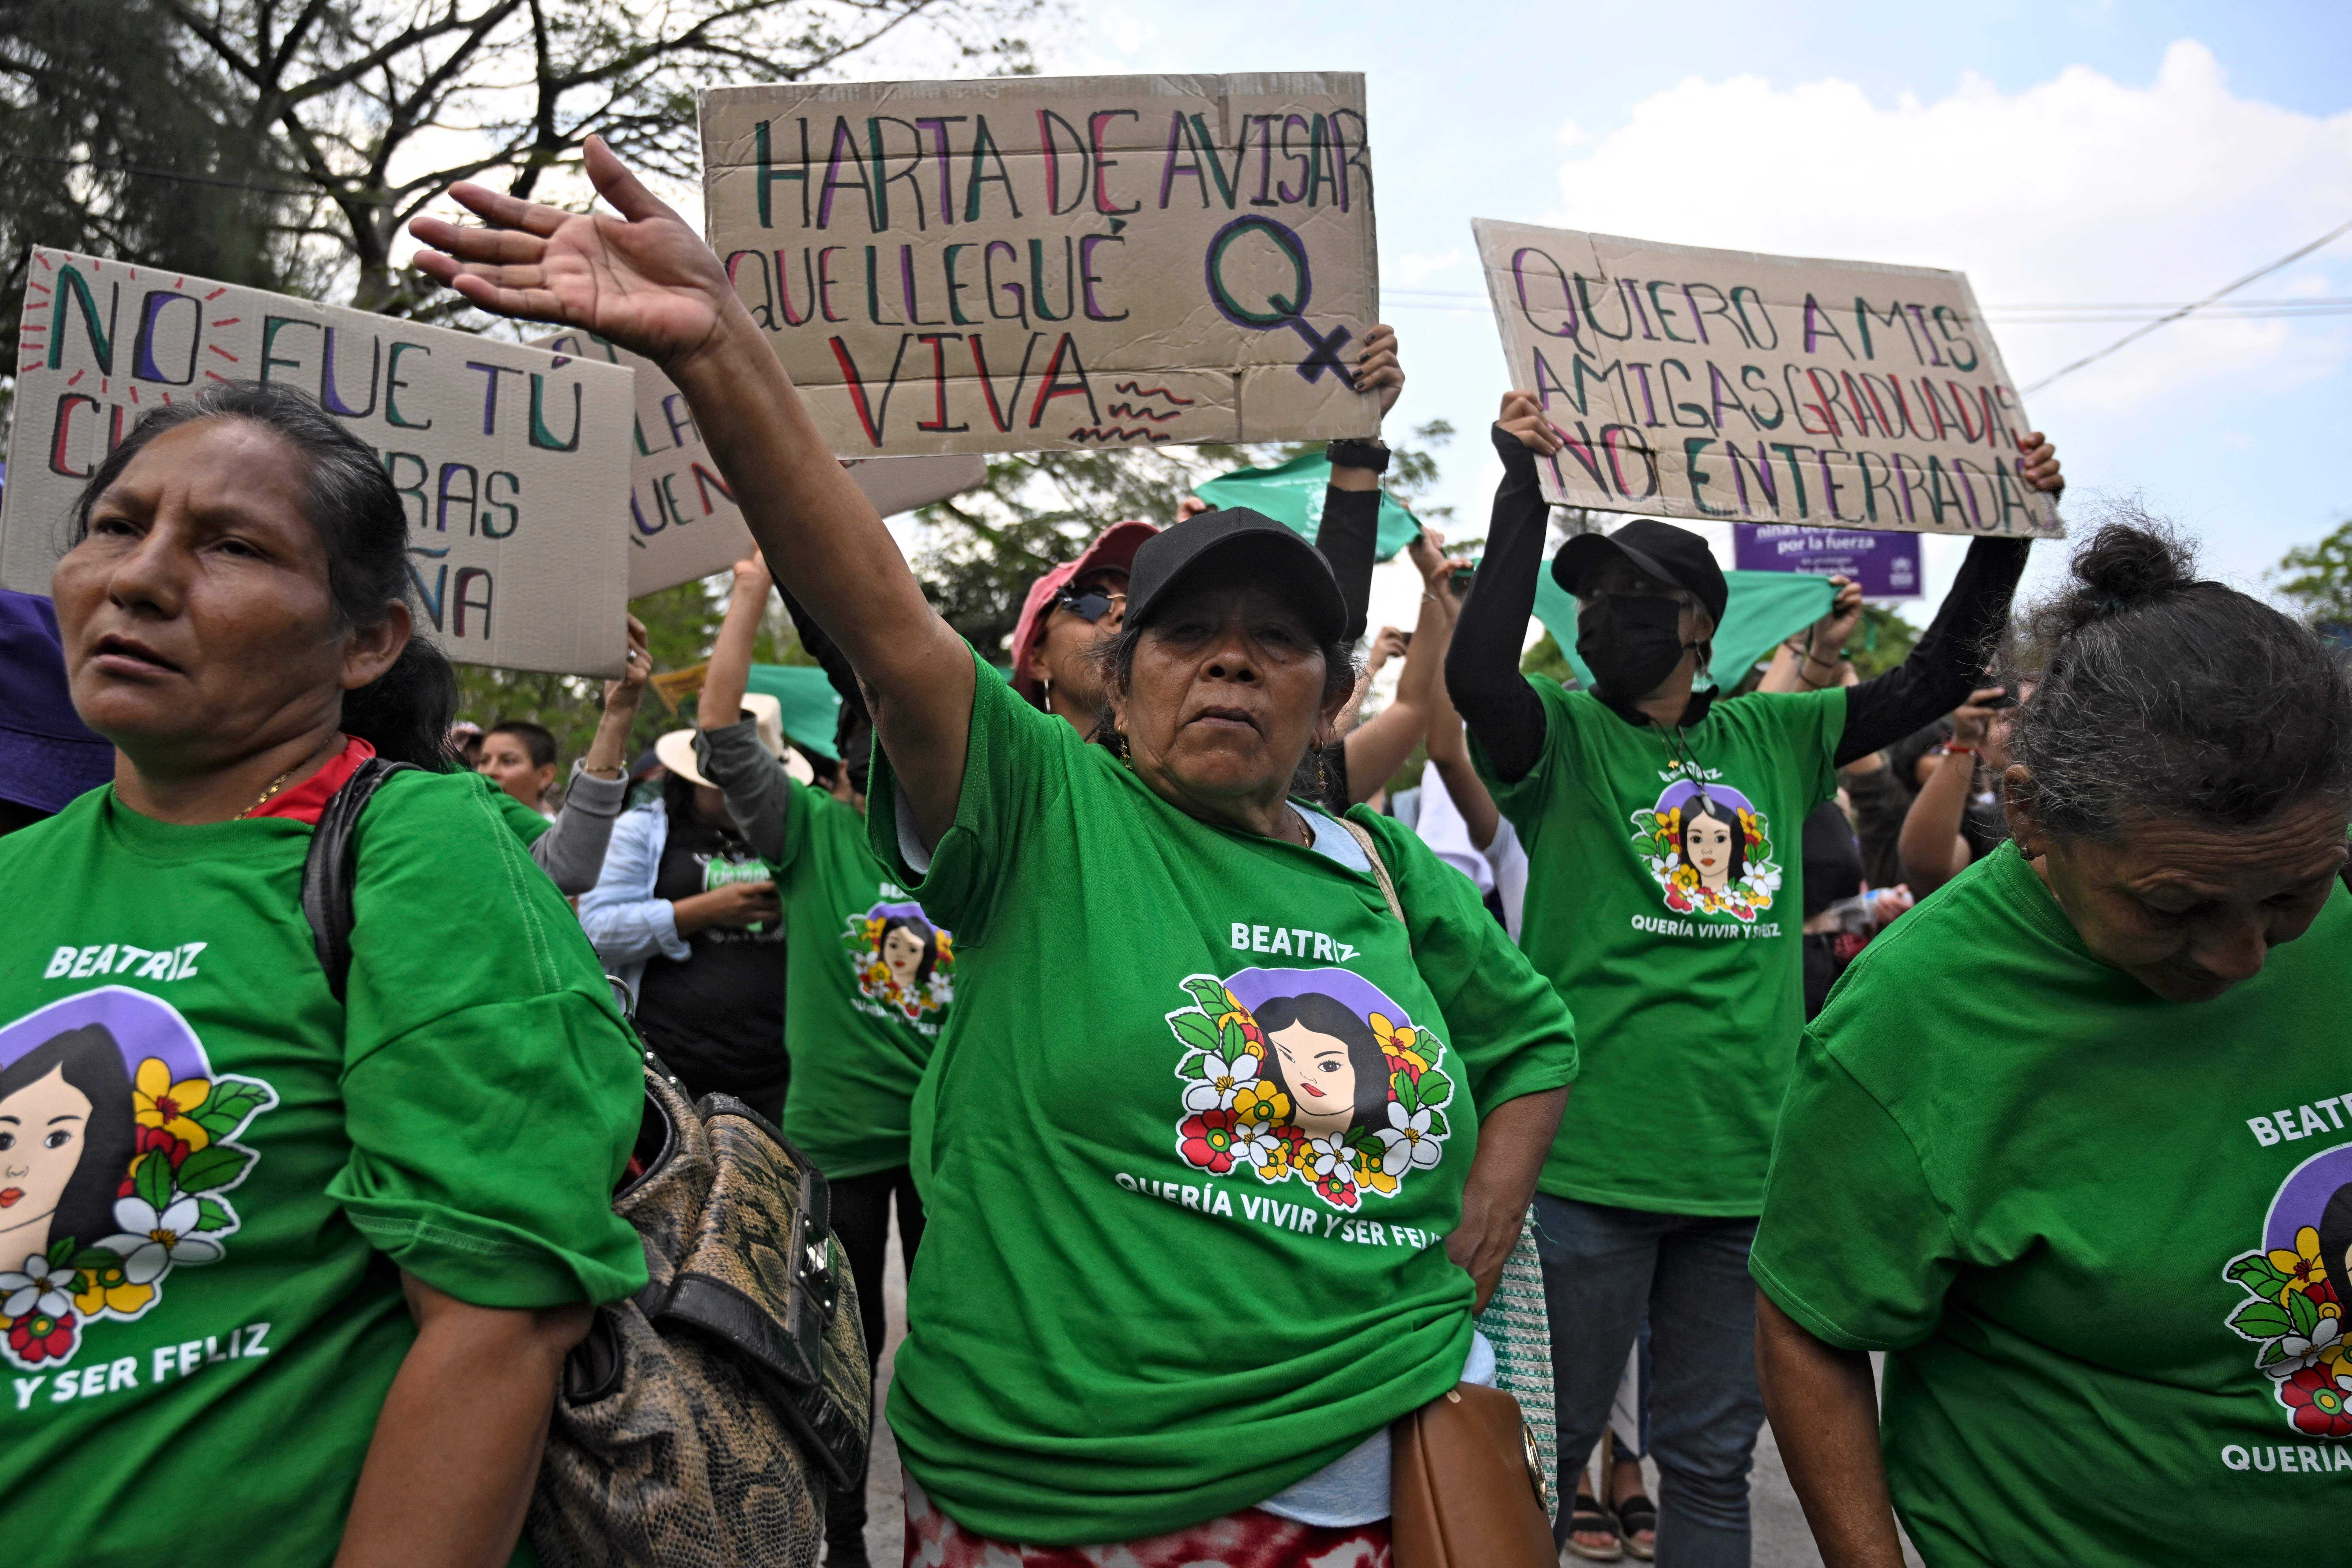 Women in green march in San Salvador during International Women's Day, holding cardboard signs protesting violence against women